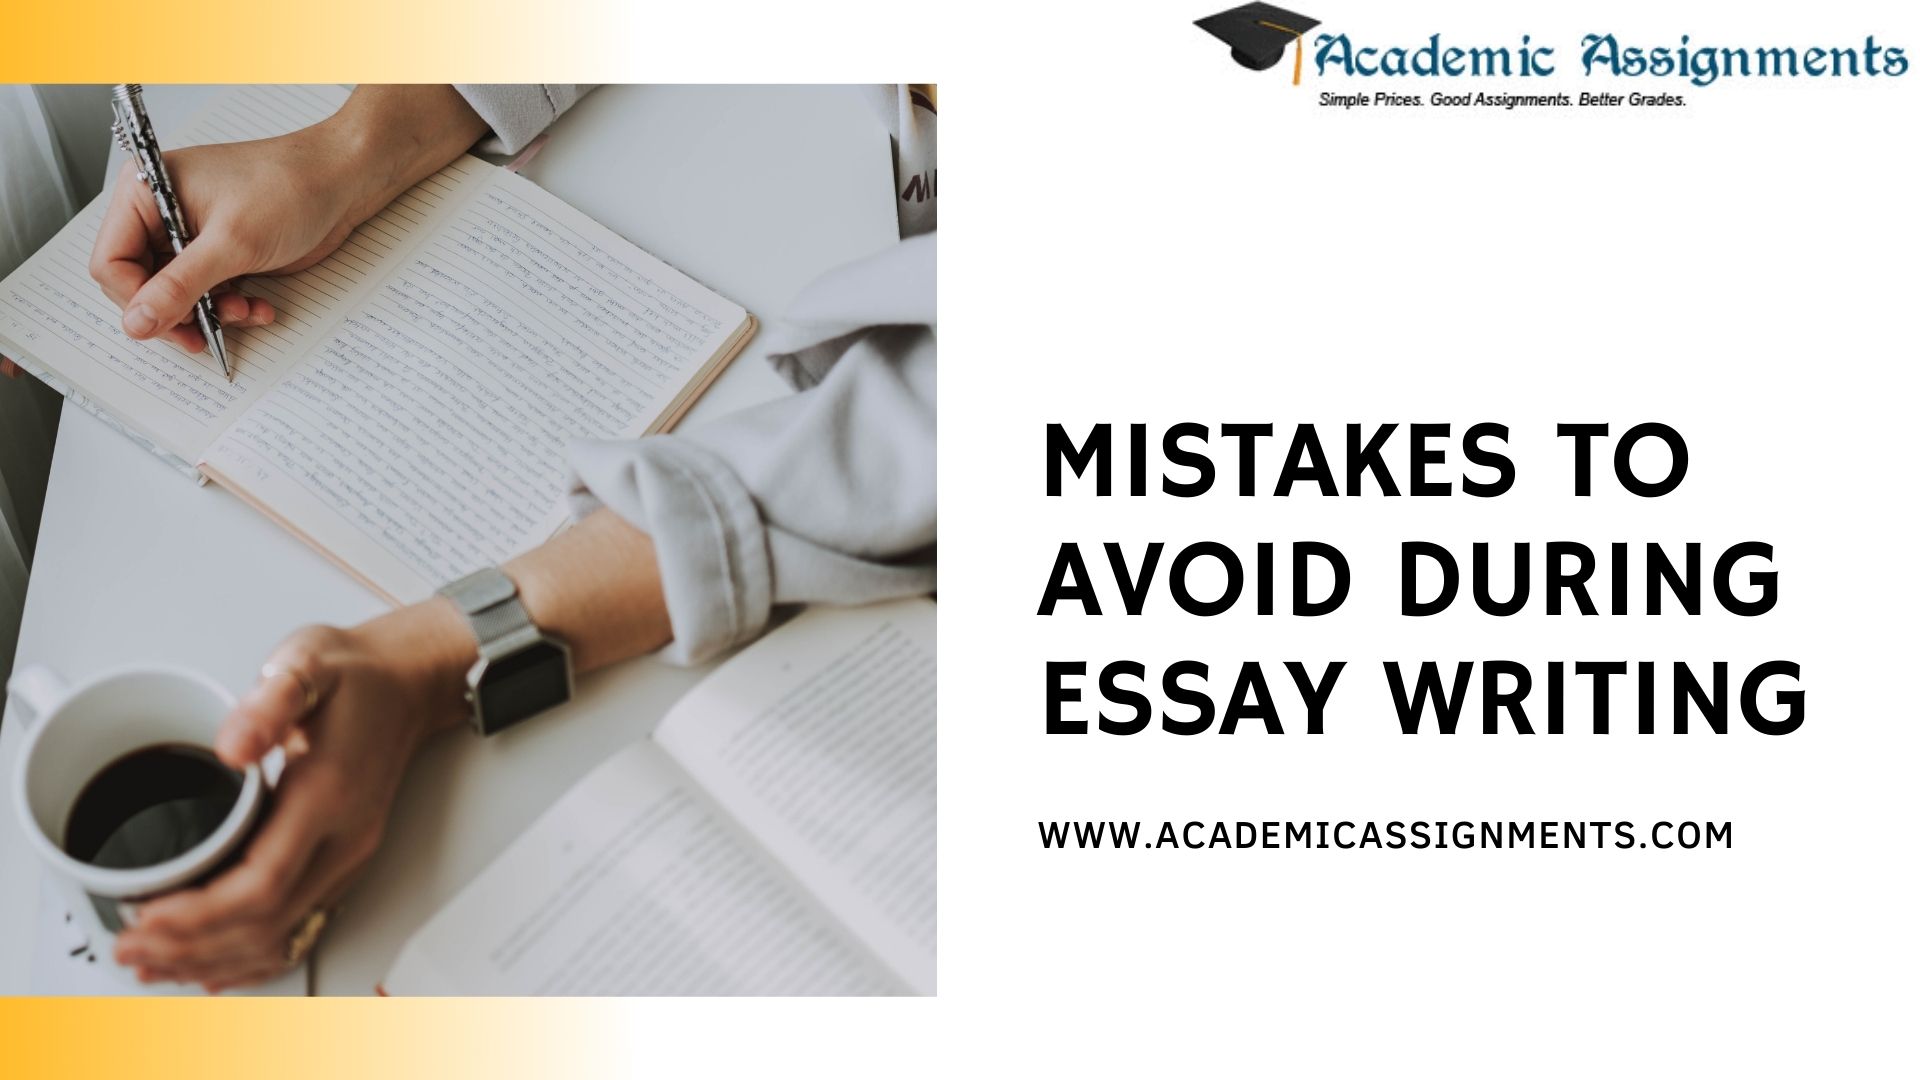 MISTAKES TO AVOID DURING ESSAY WRITING